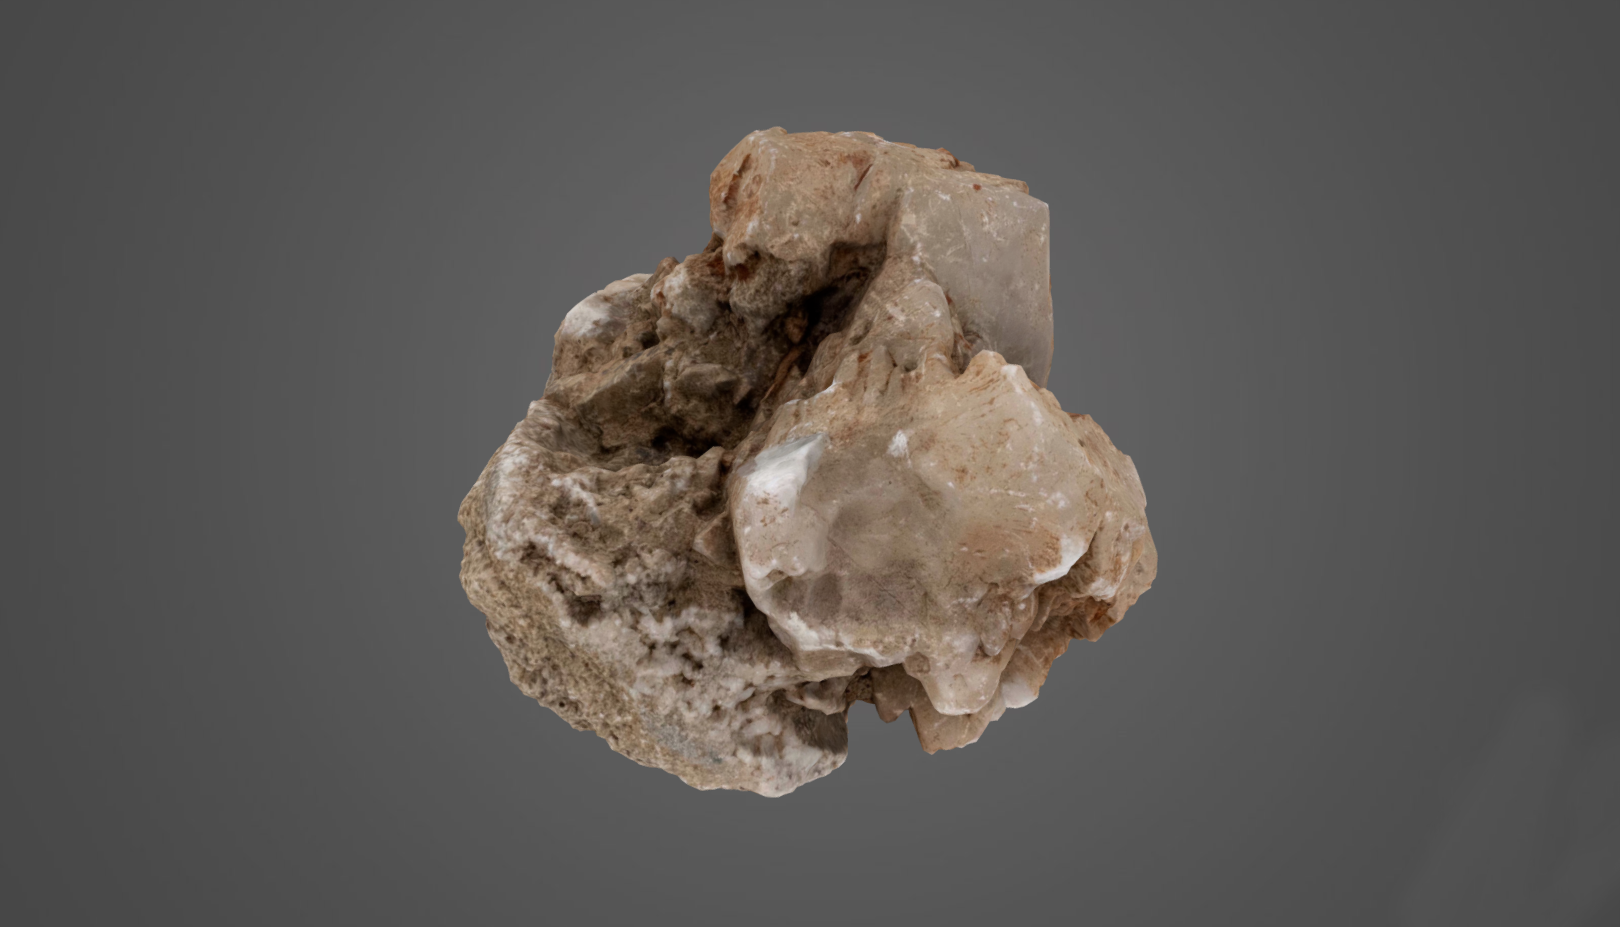 3D Scan of Calcite Sample